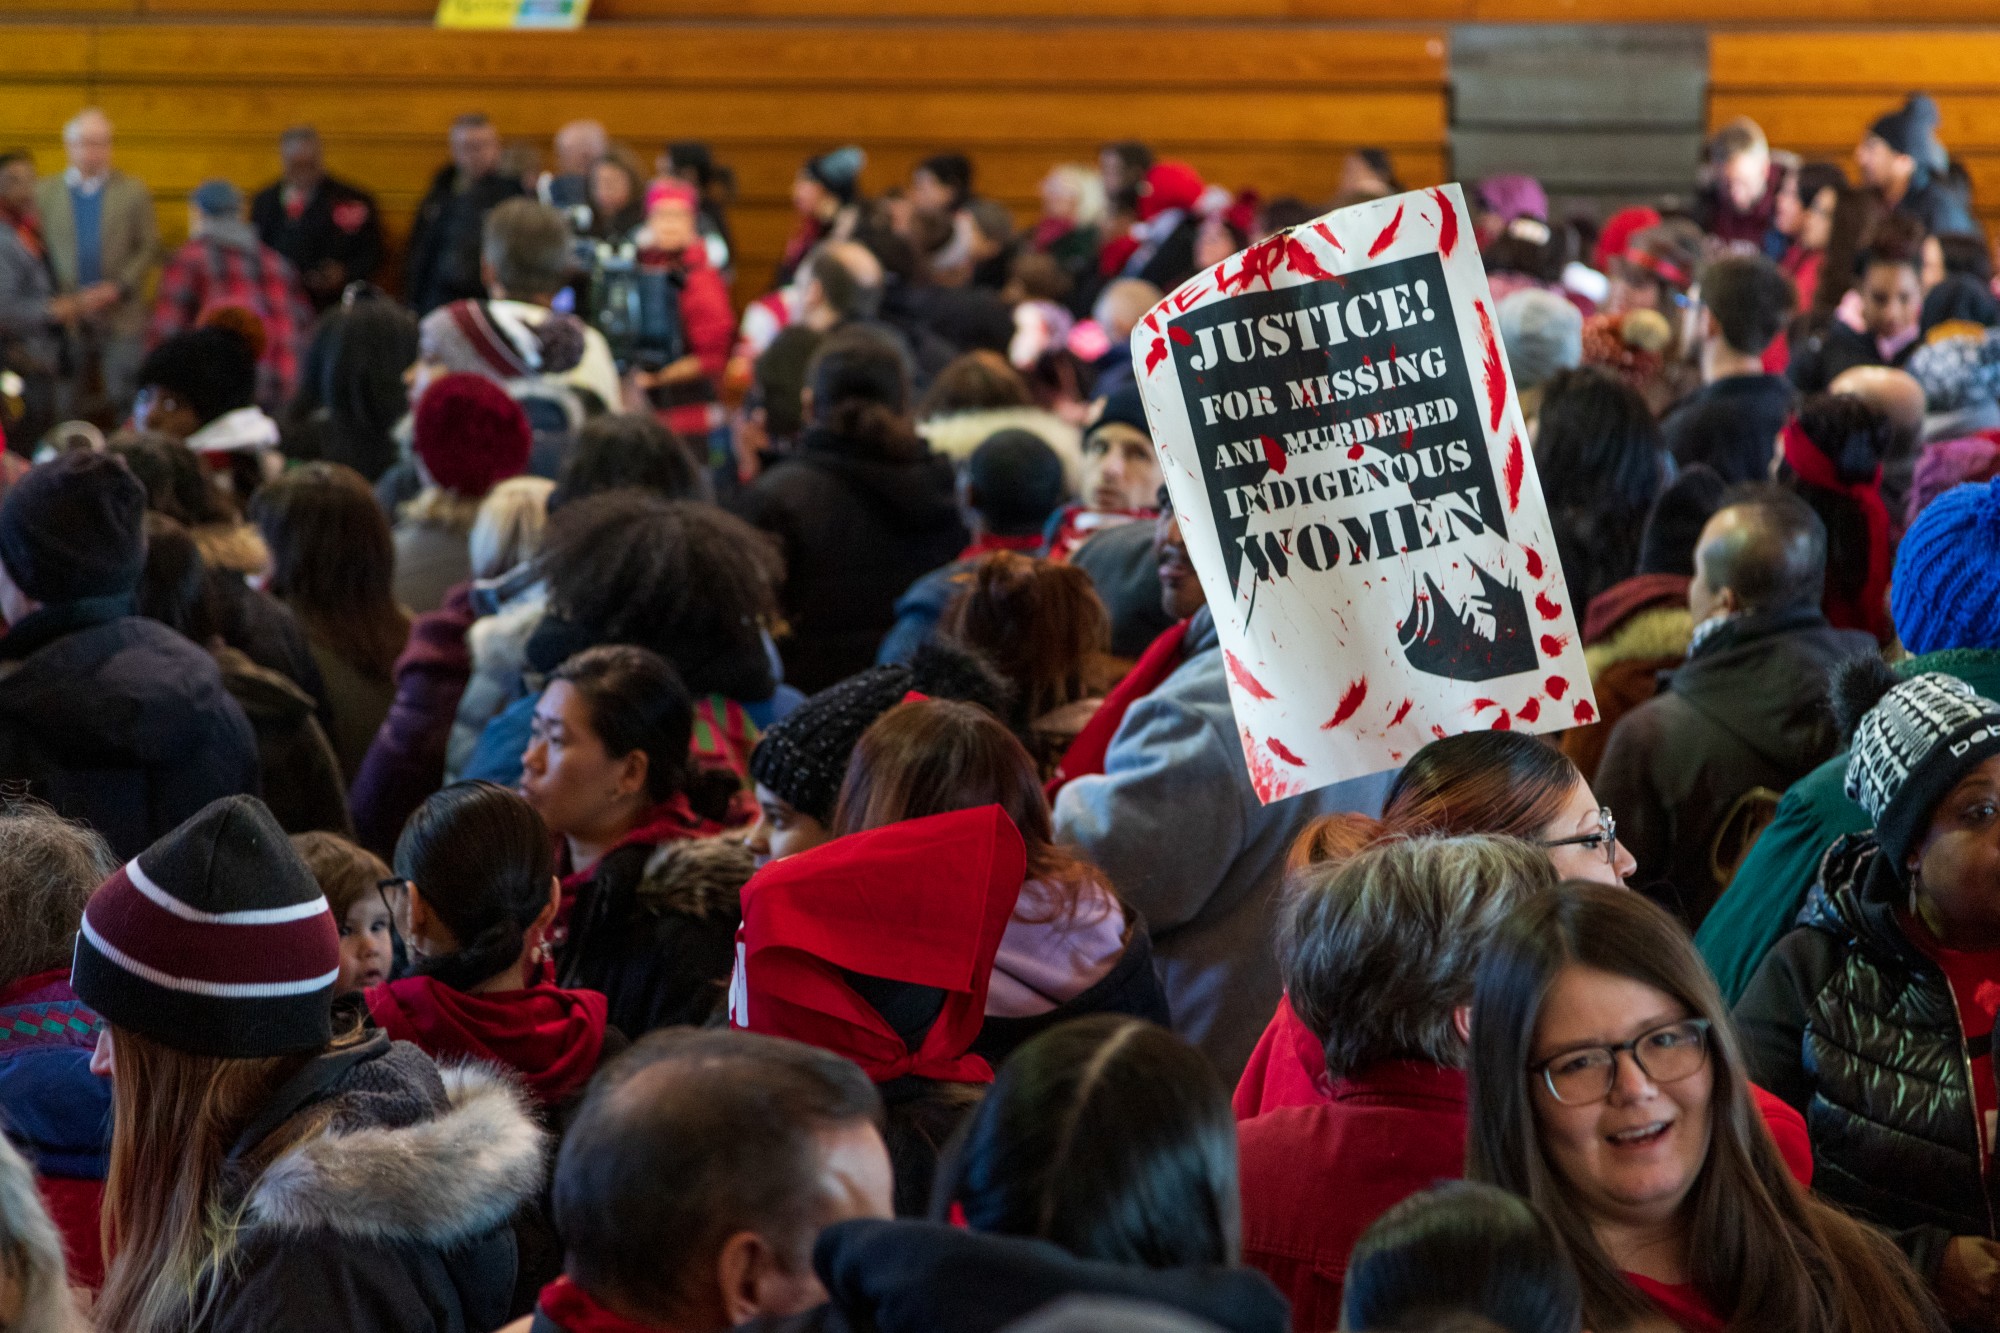 A crowd gathers to march to raise awareness for missing and murdered Indigenous women at the Minneapolis American Indian Center on Friday, Feb. 14.